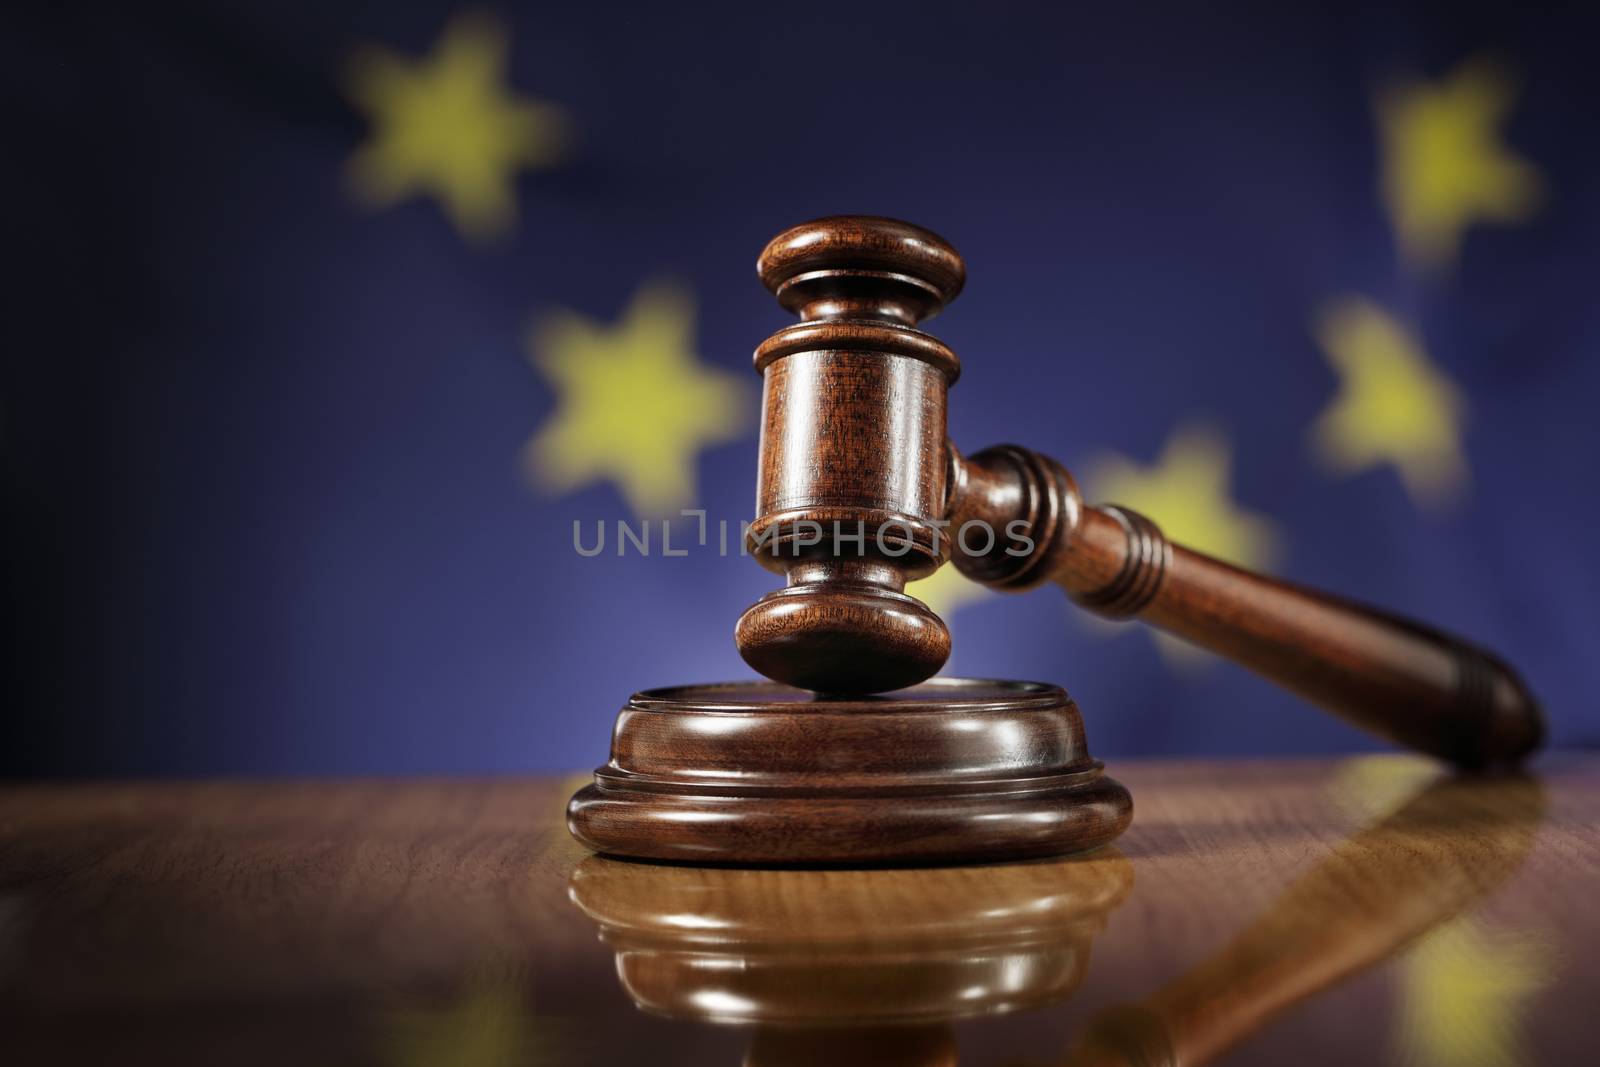 European Union Law by Stocksnapper